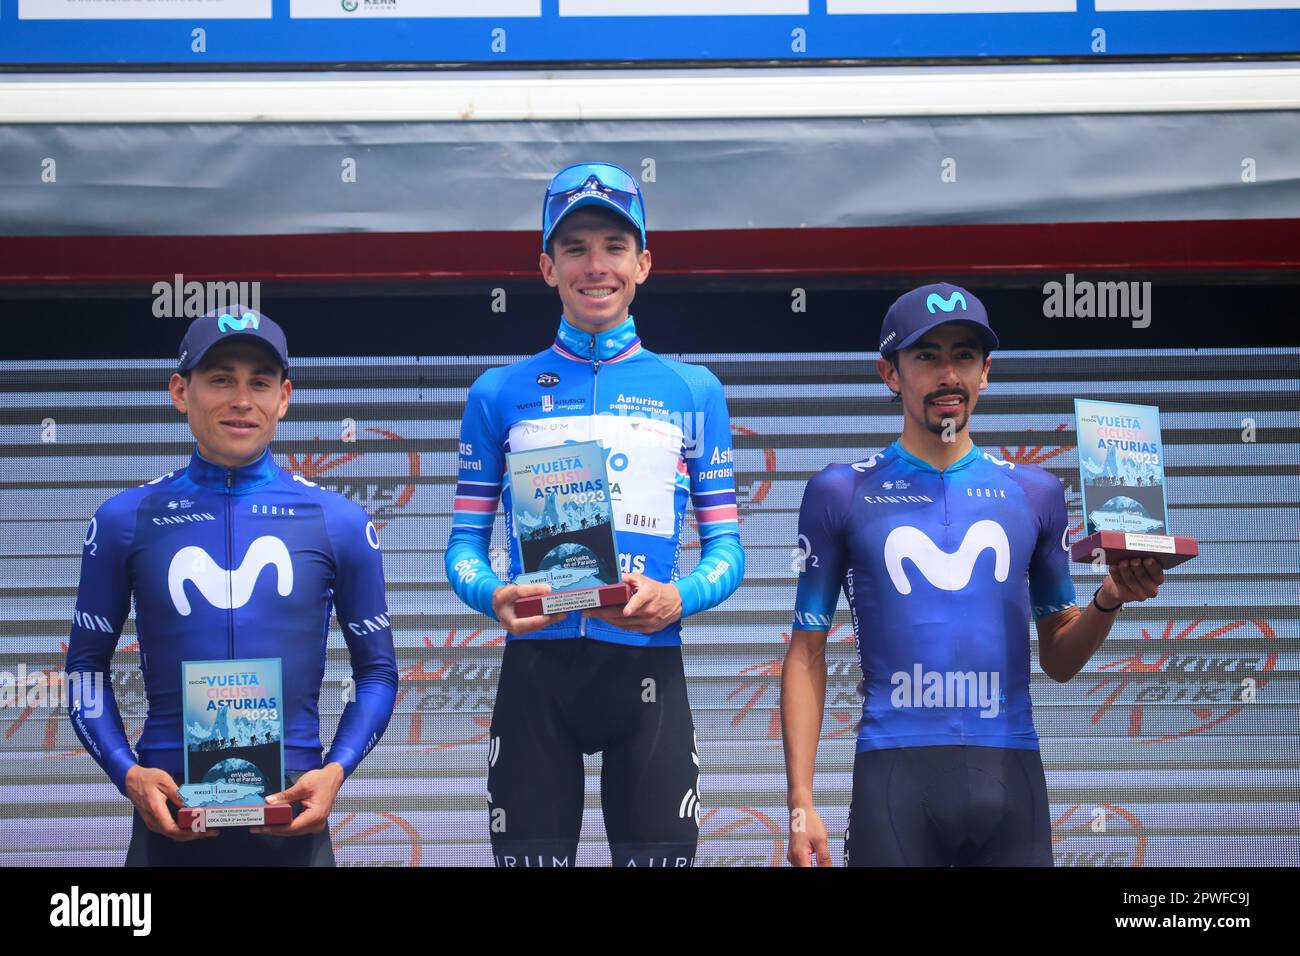 Oviedo, Spain, 30th April, 2023: The final podium with Lorenzo Fortunato (EOLO-Kometa), Einer Augusto Rubio (Movistar Team, L) and Ivan Ramiro Sosa (Movistar Team, R) during the 3rd stage of the Vuelta a Asturias 2023 between Cangas del Narcea and Oviedo, on April 30, 2023, in Oviedo, Spain. Credit: Alberto Brevers / Alamy Live News Stock Photo